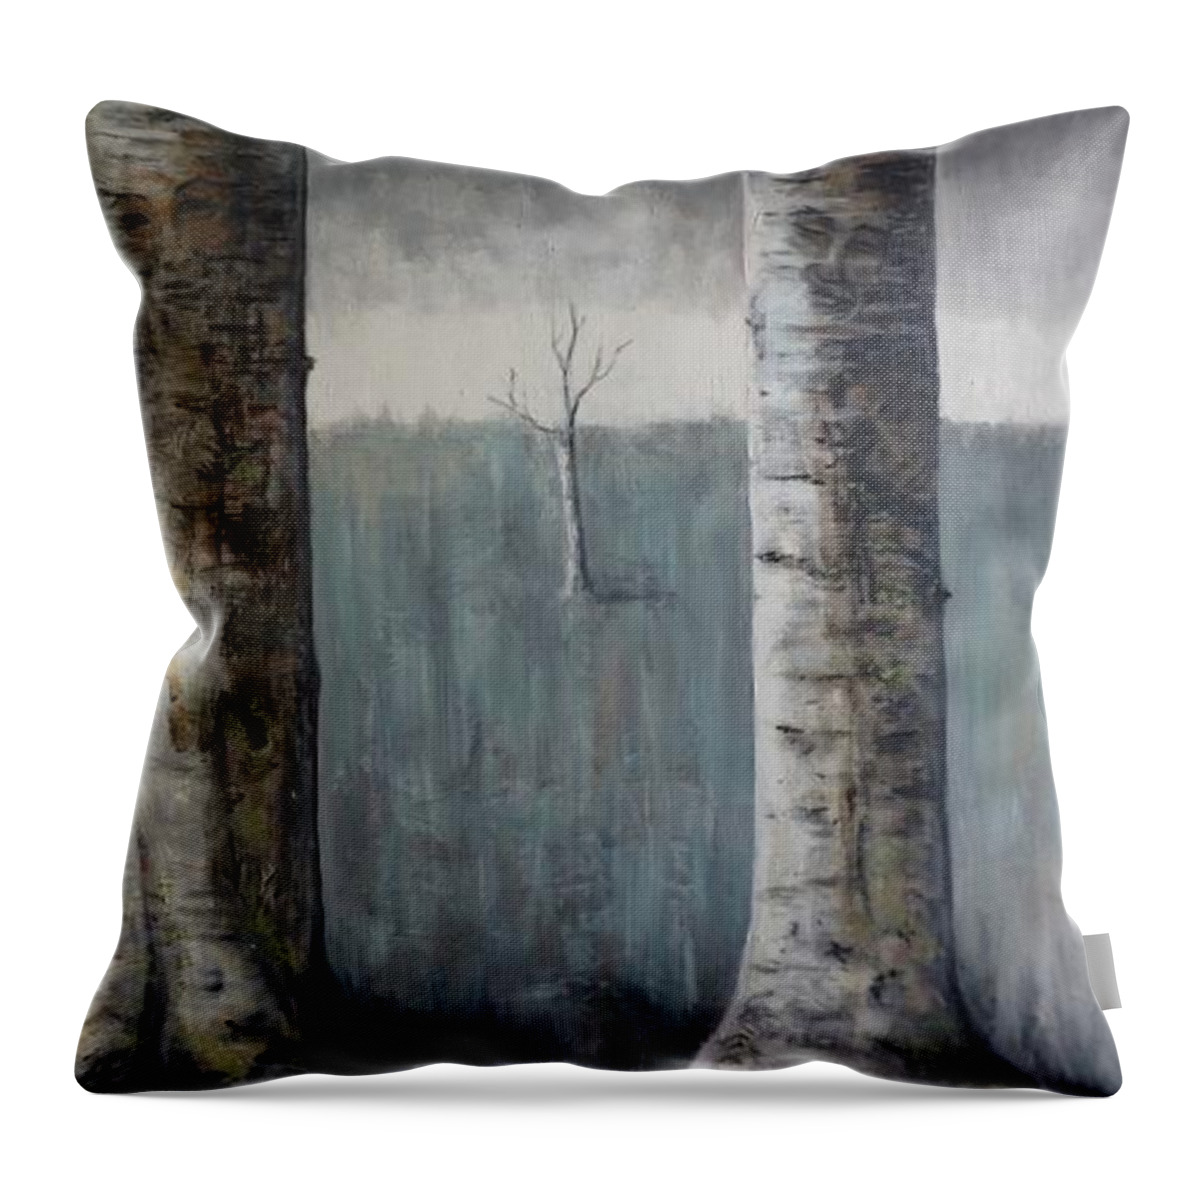 Landscape Throw Pillow featuring the painting Family Tree by Yvonne Ayoub